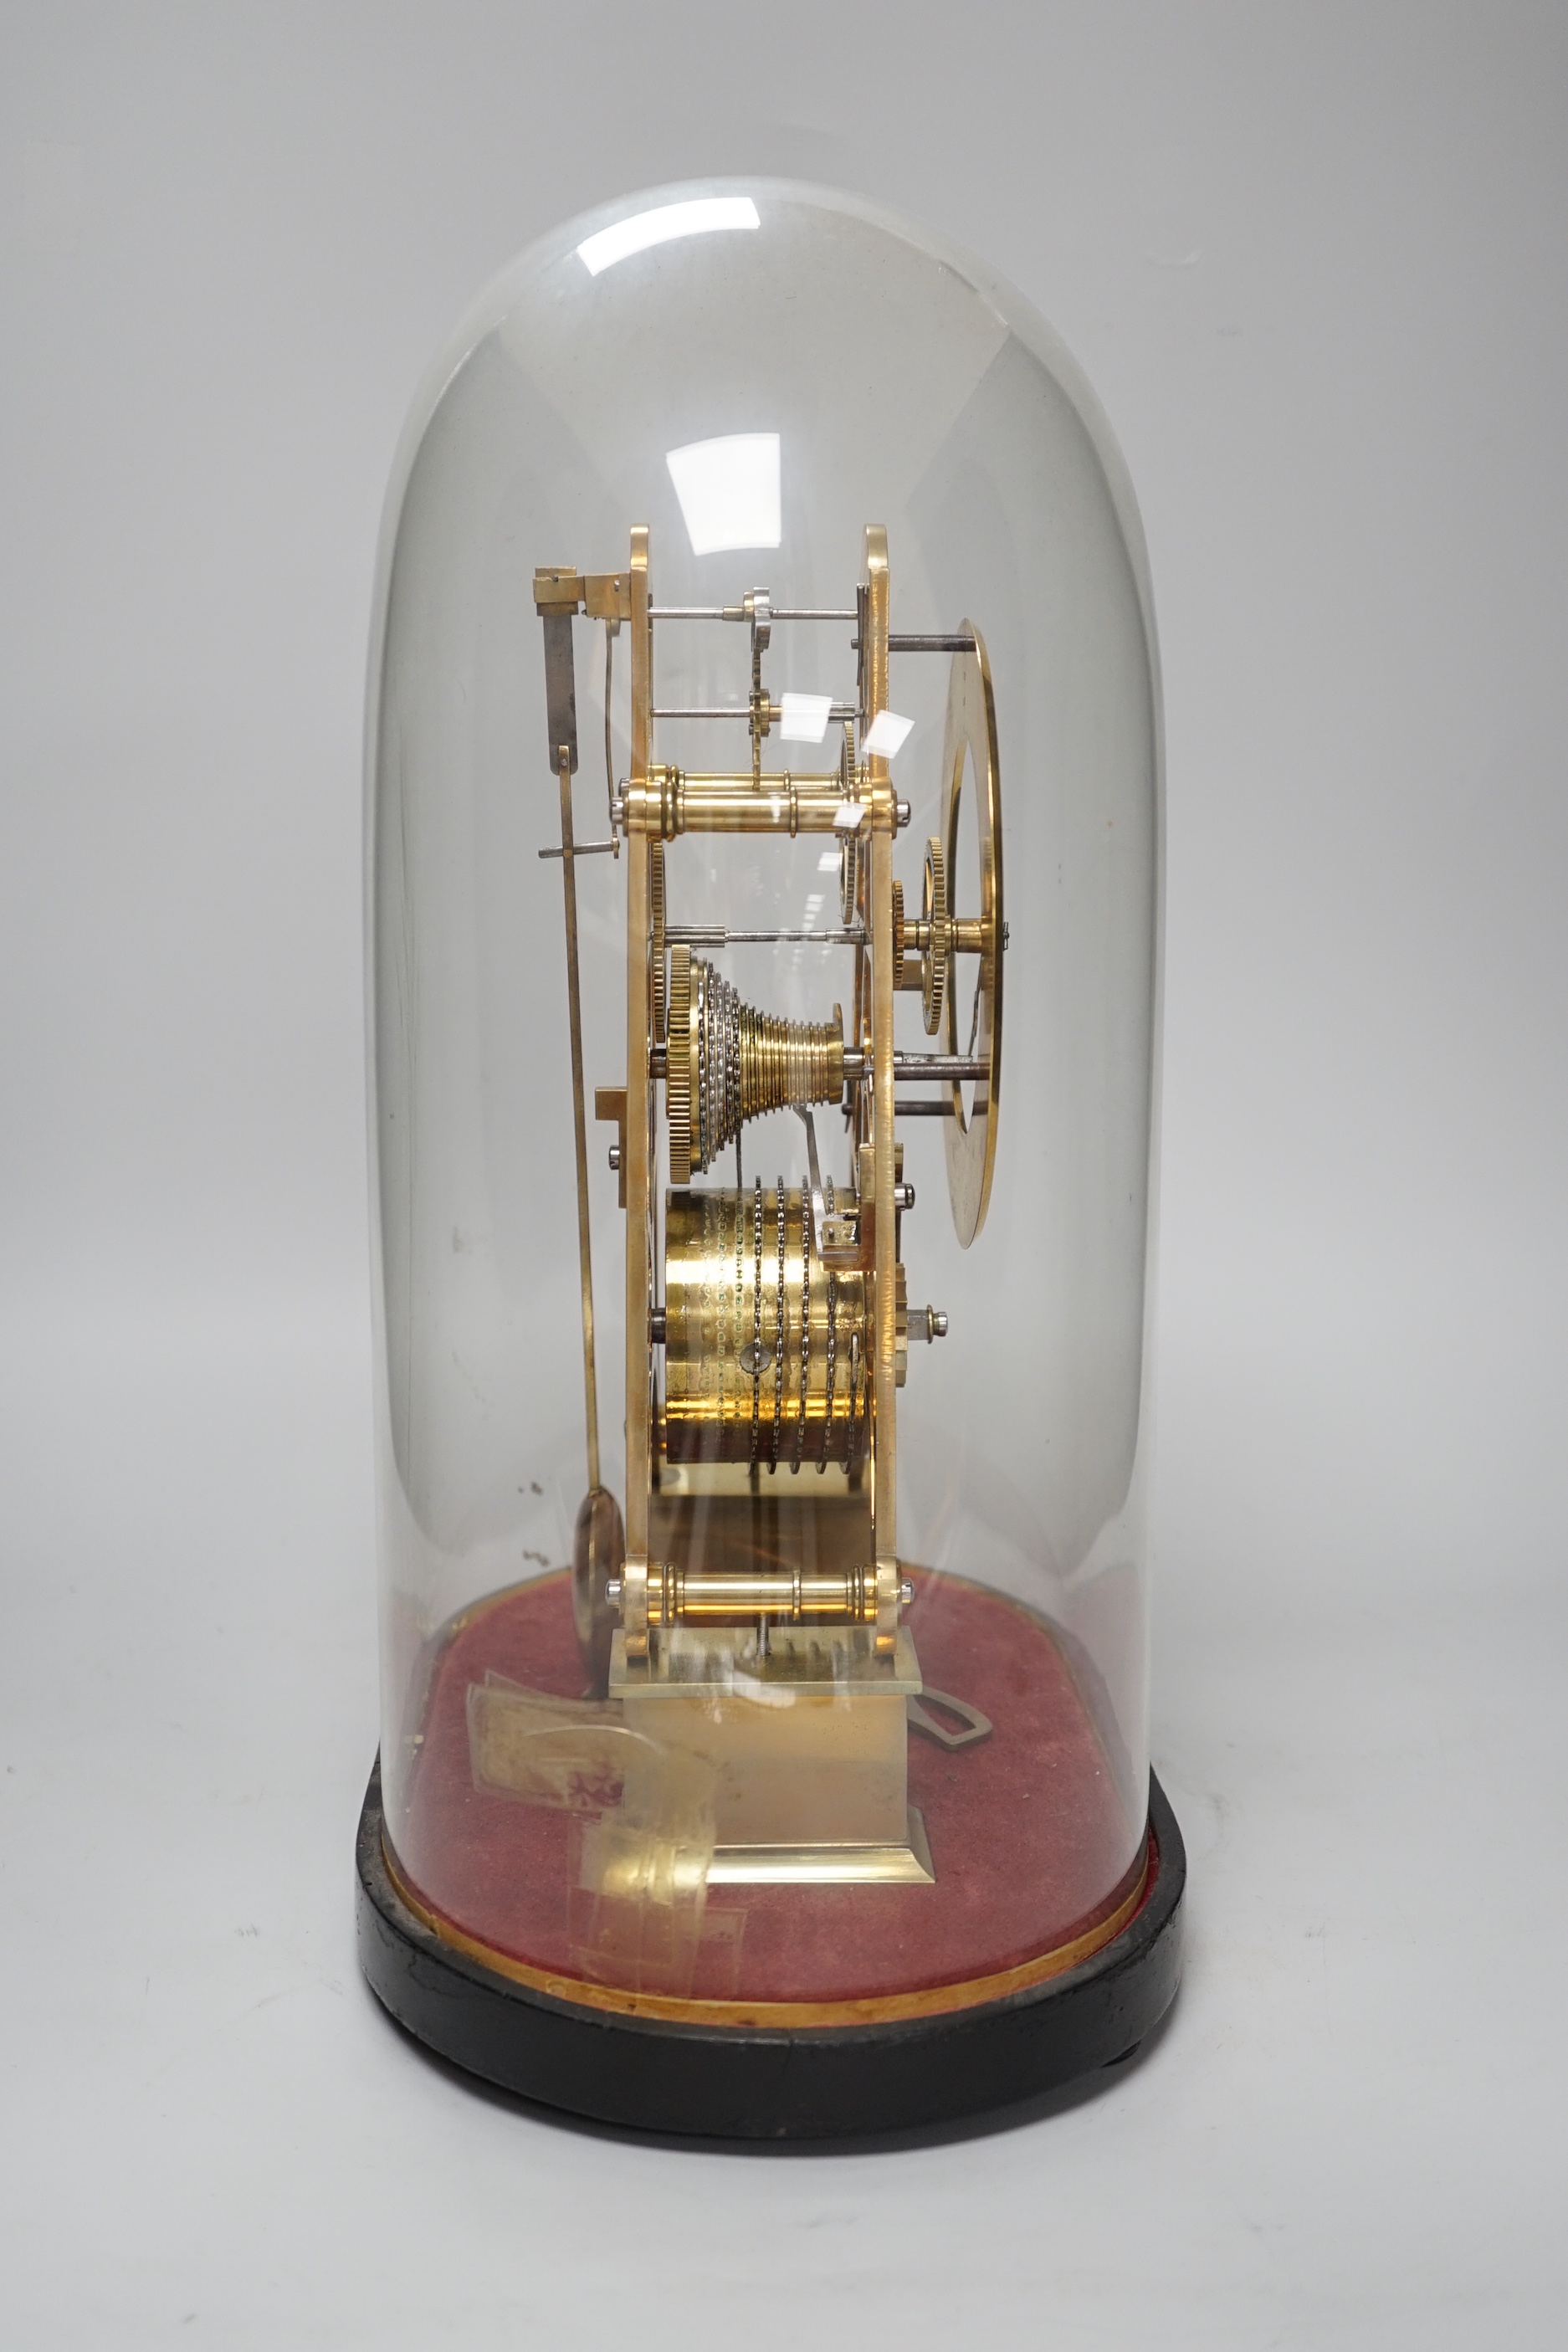 Simmons of London. A brass single fusee skeleton clock under dome, 38cm tall